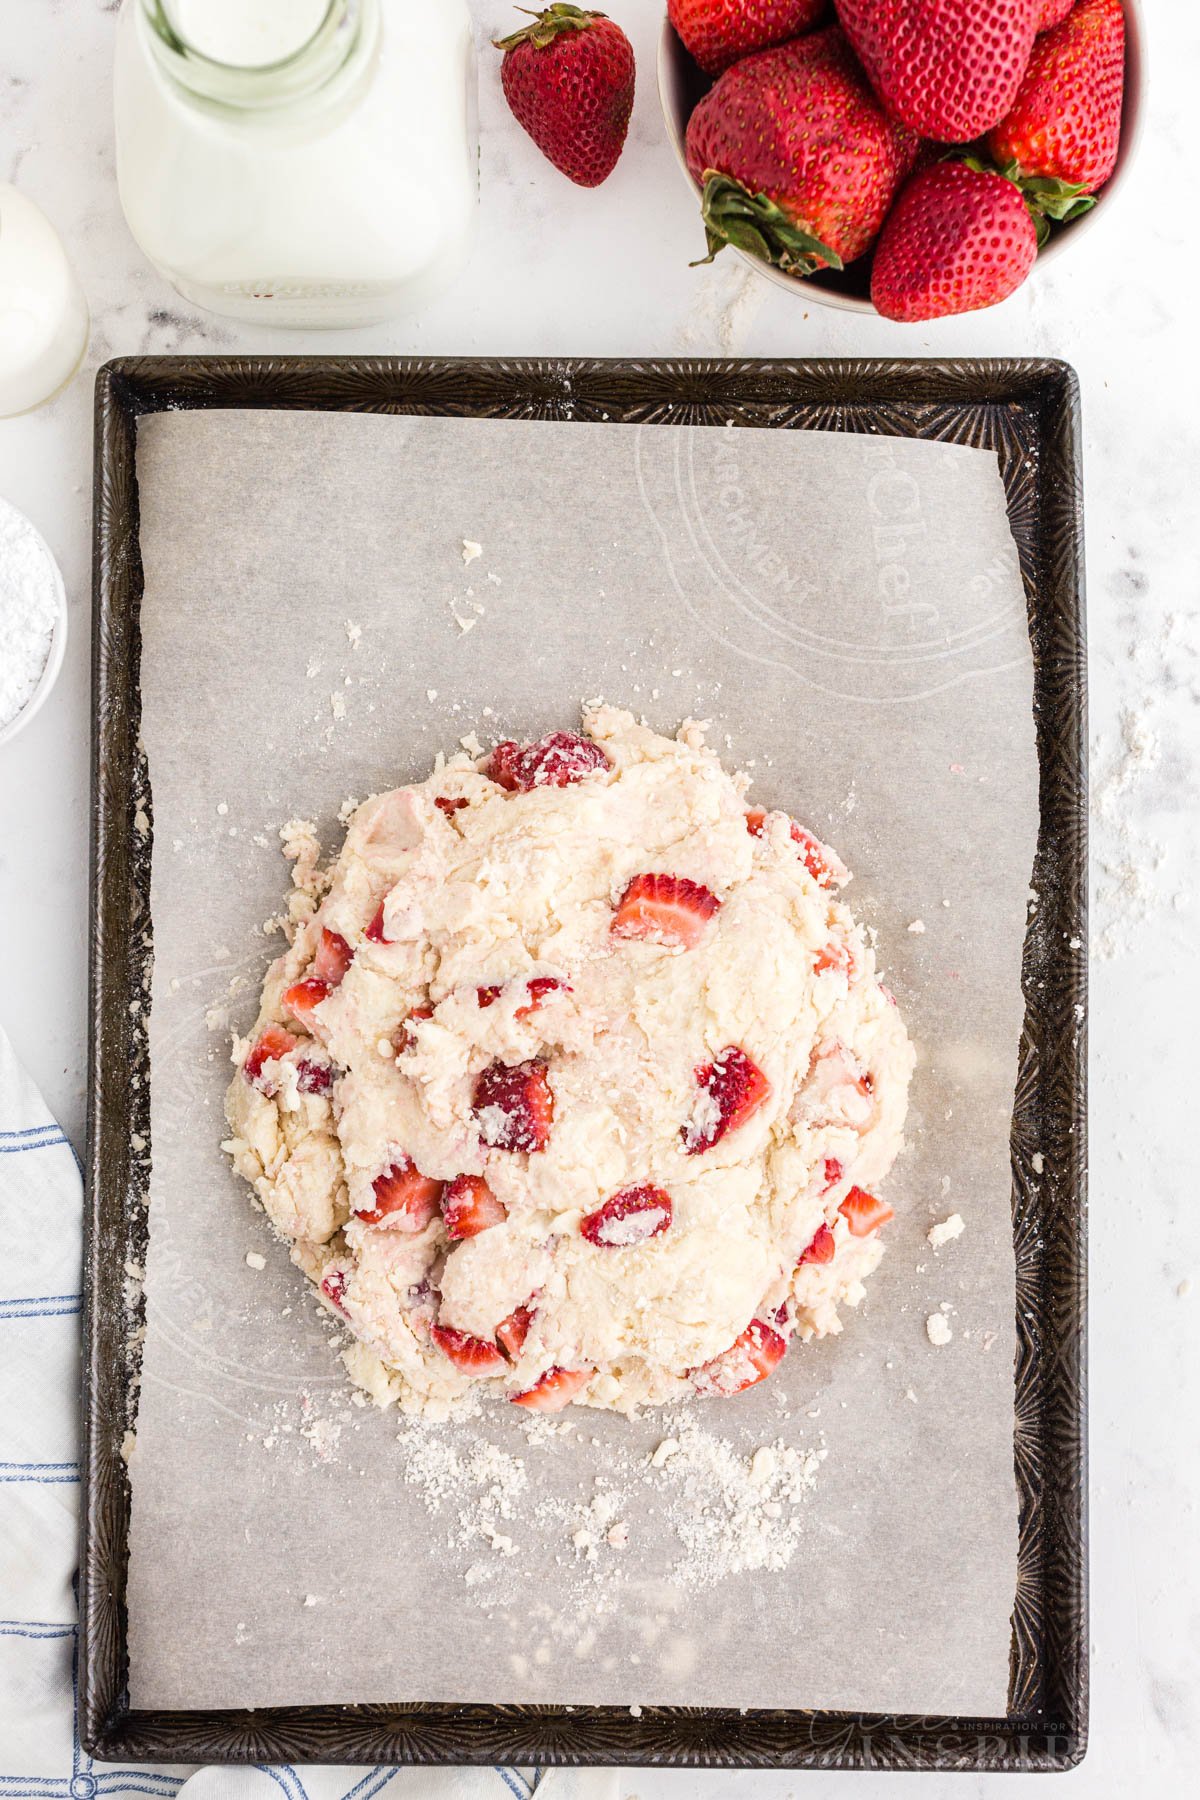 One round of strawberry scone dough patted down on parchment paper-lined baking sheet.